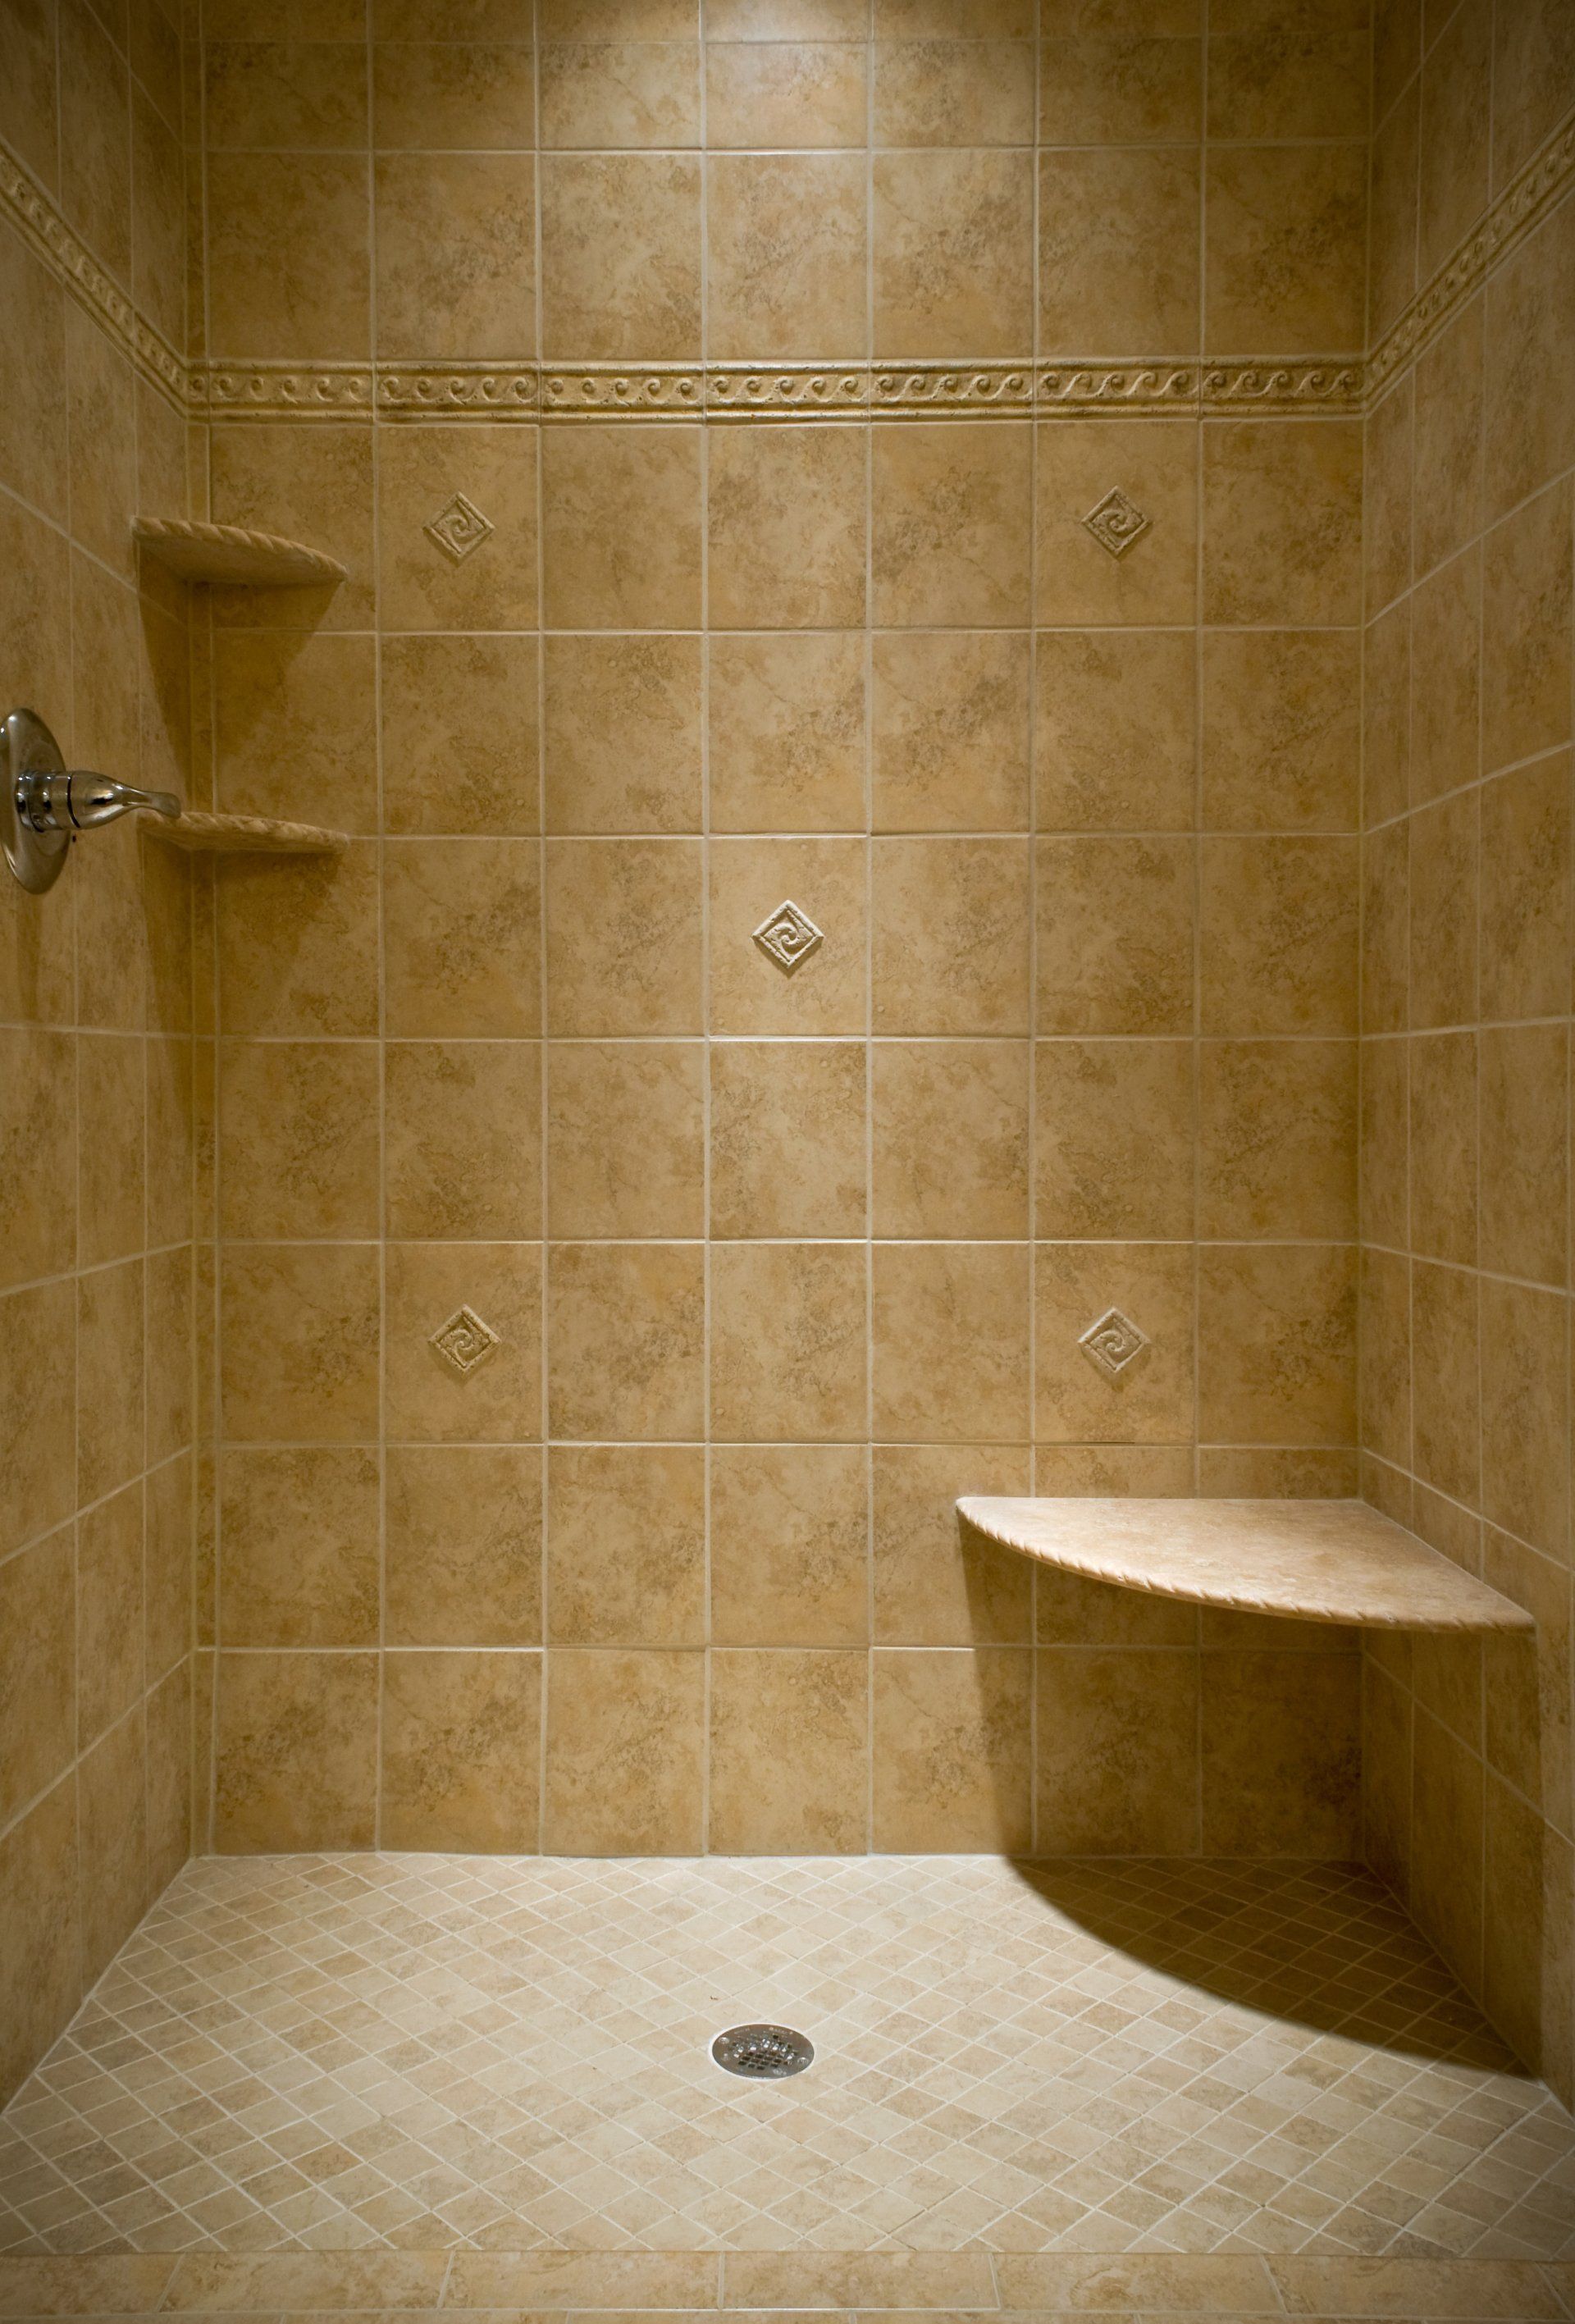 correct shower seat placement